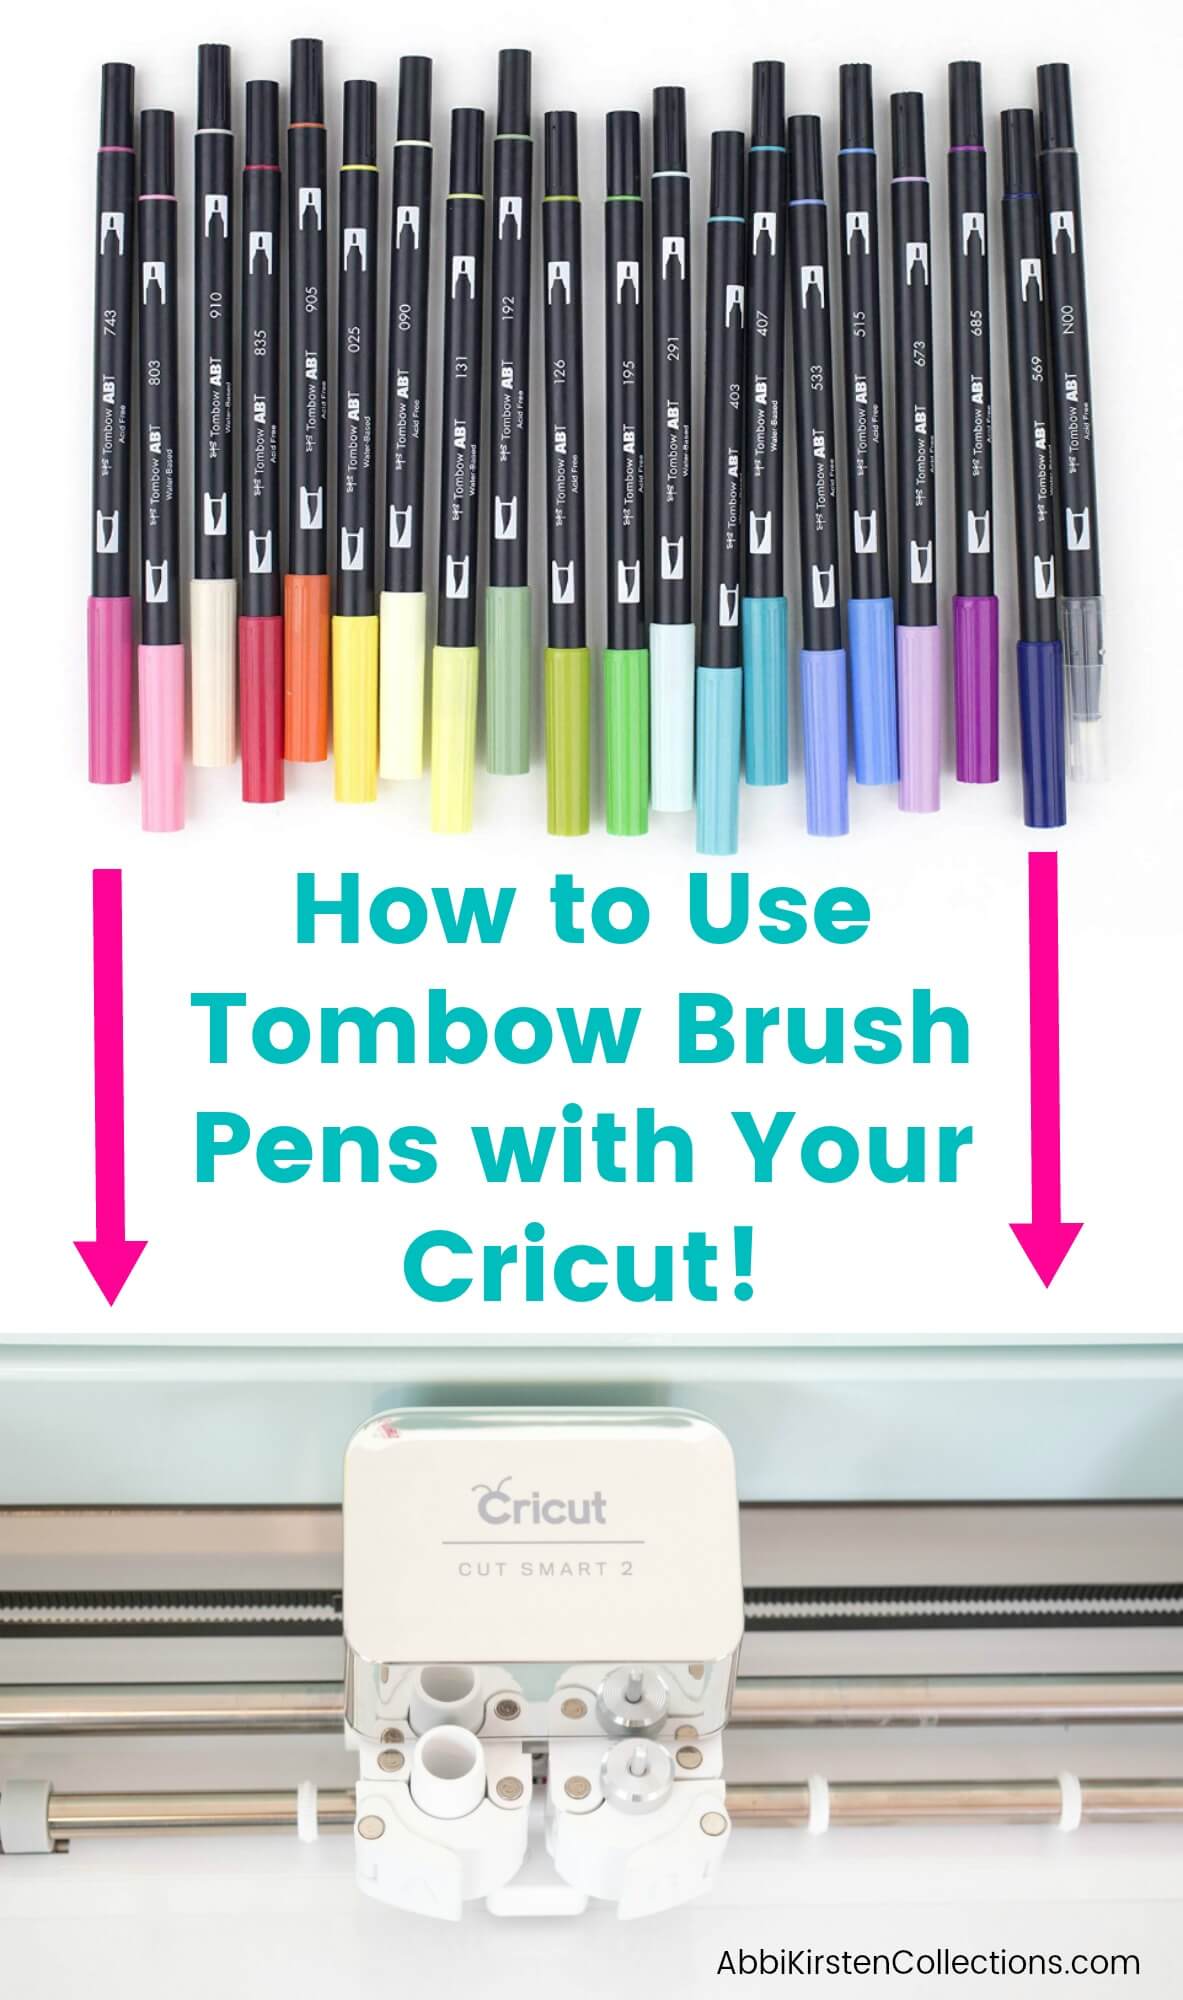 What Pens Work With Cricut? Story - Abbi Kirsten Collections